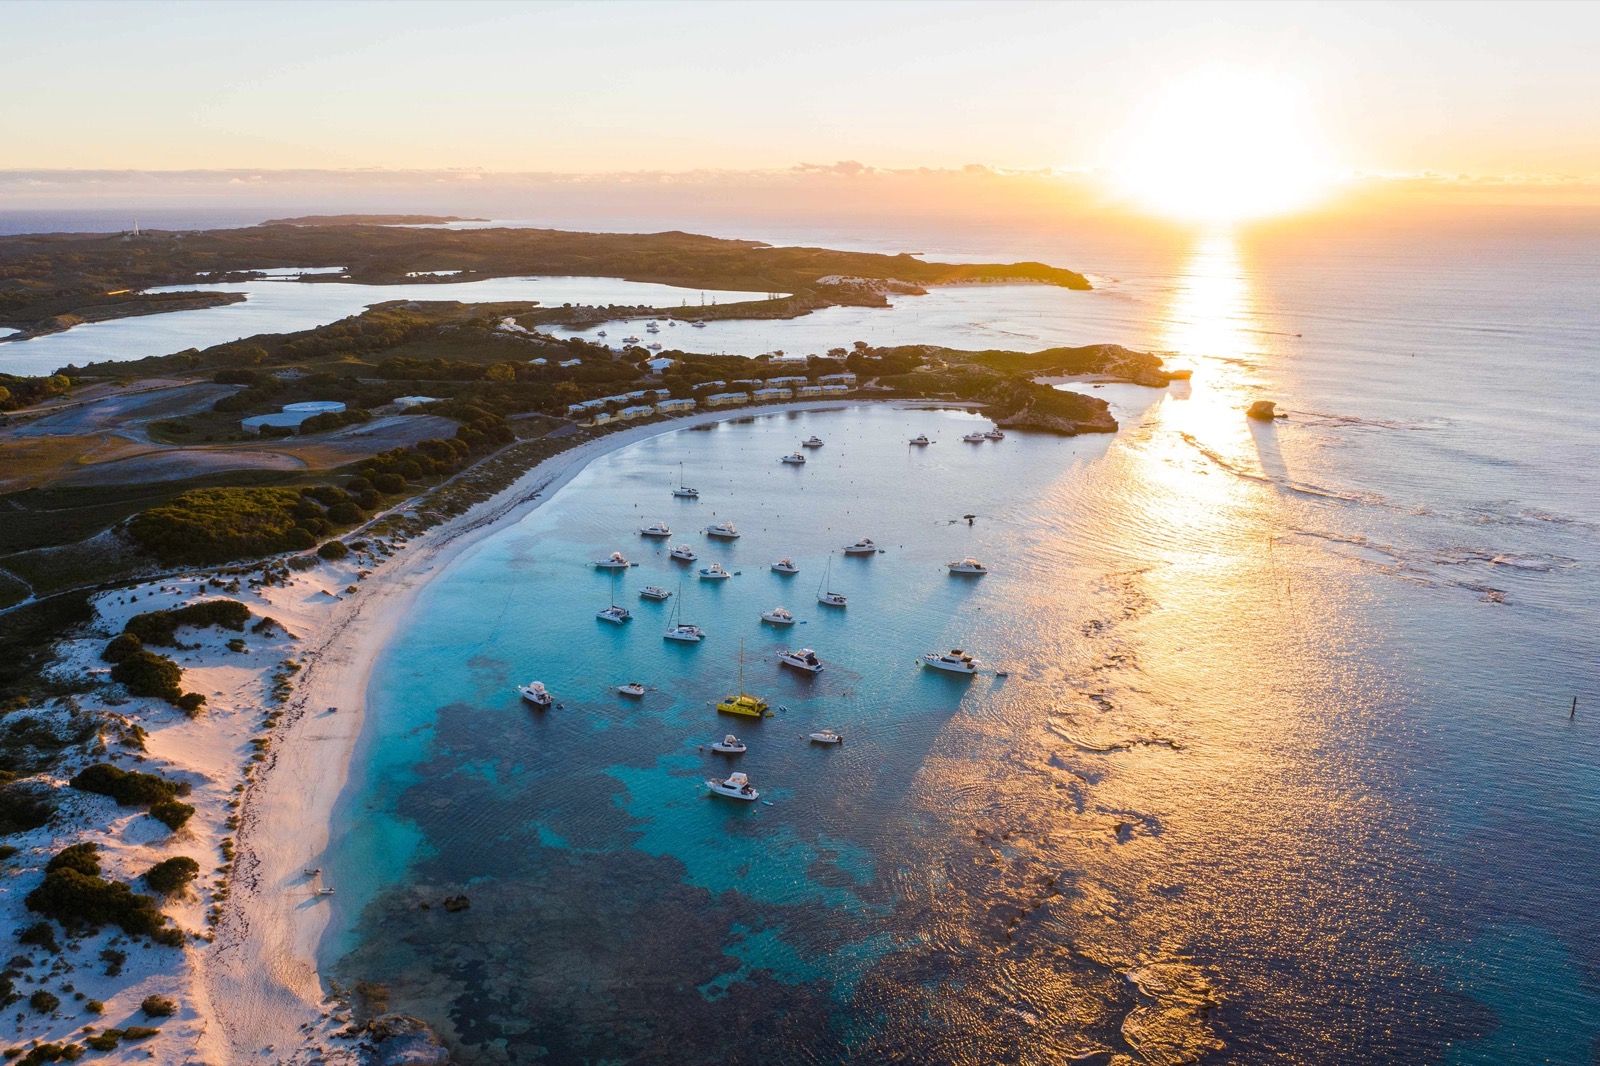 This Travel Quiz Is Scientifically Designed to Determine the Time Period You Belong in Rottnest Island, Australia